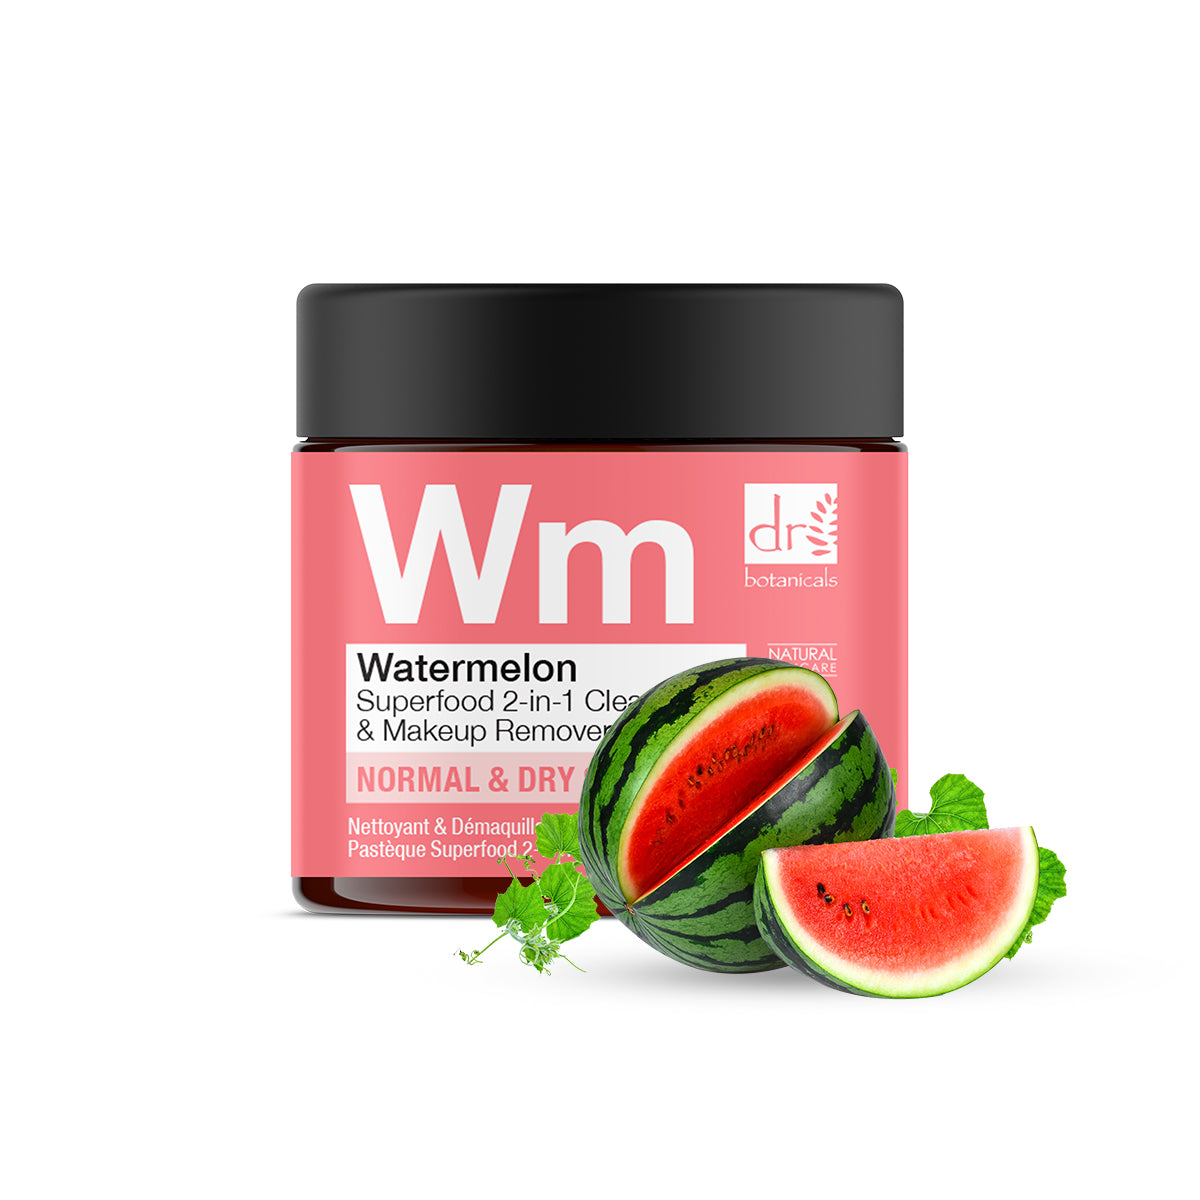 Watermelon 2in1 Cleanser & Makeup Remover (2oz Jar)